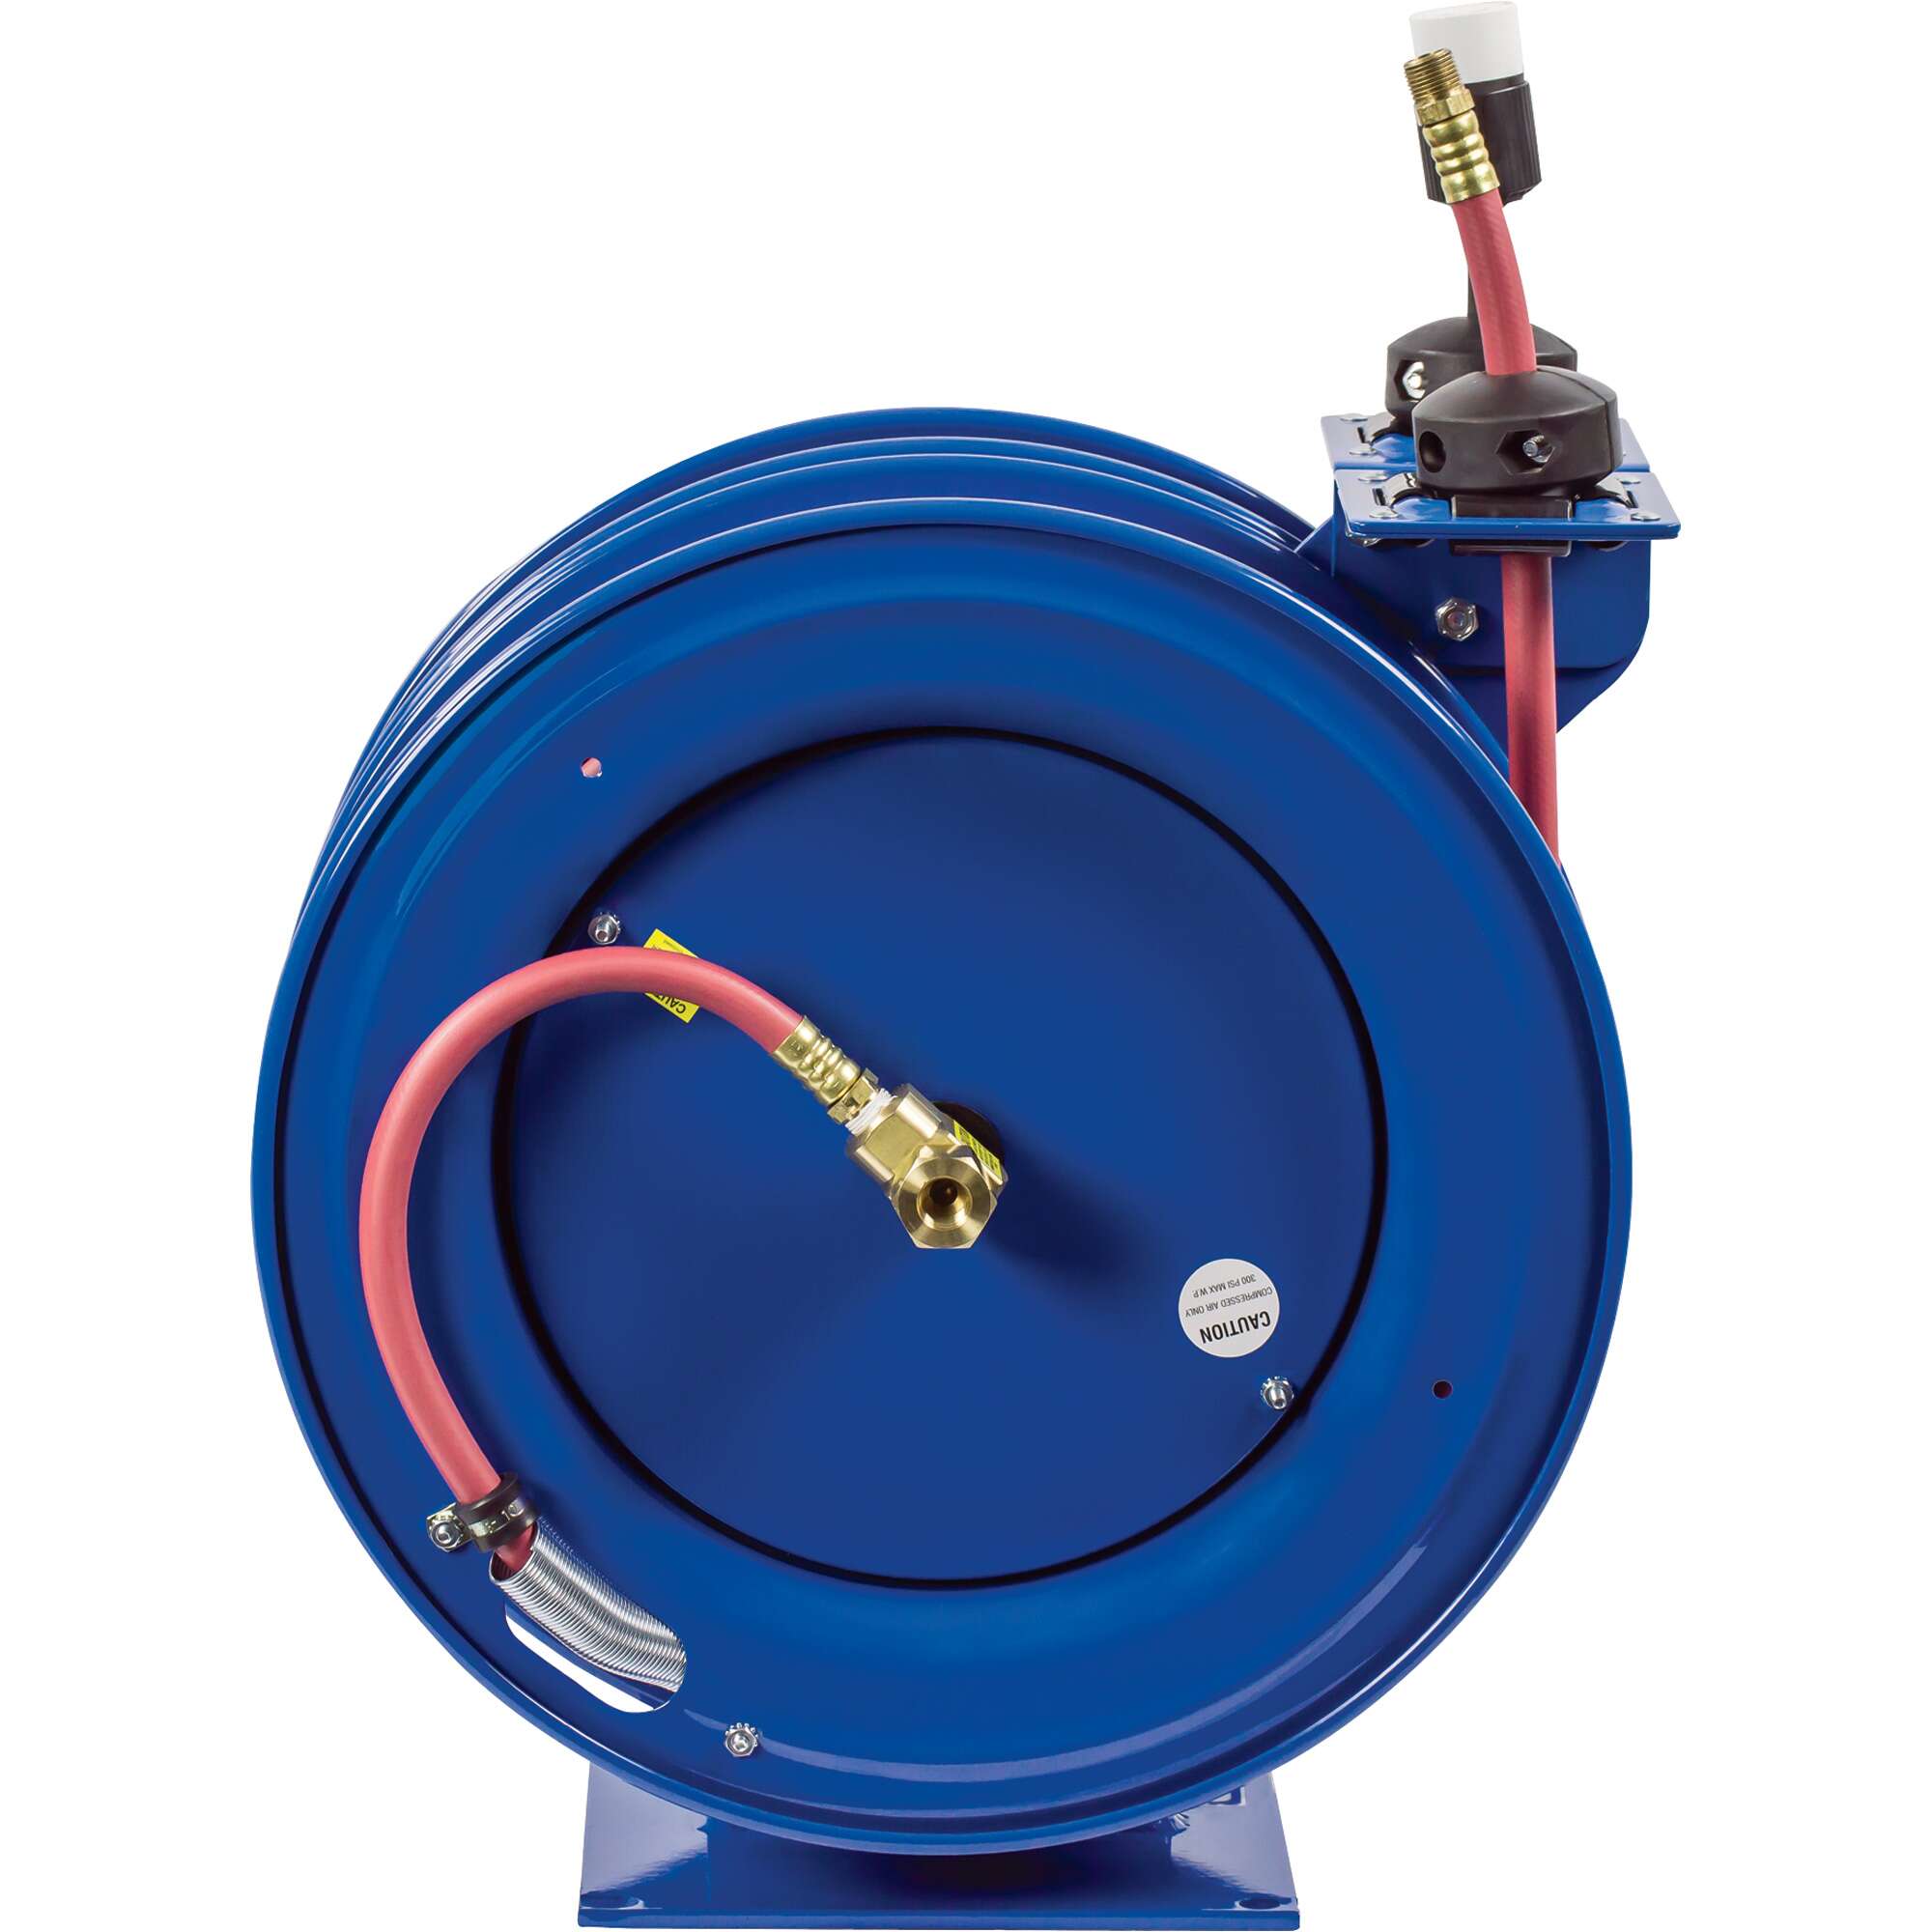 Ironton Air Hoses, Fittings, and Air Hose Reels